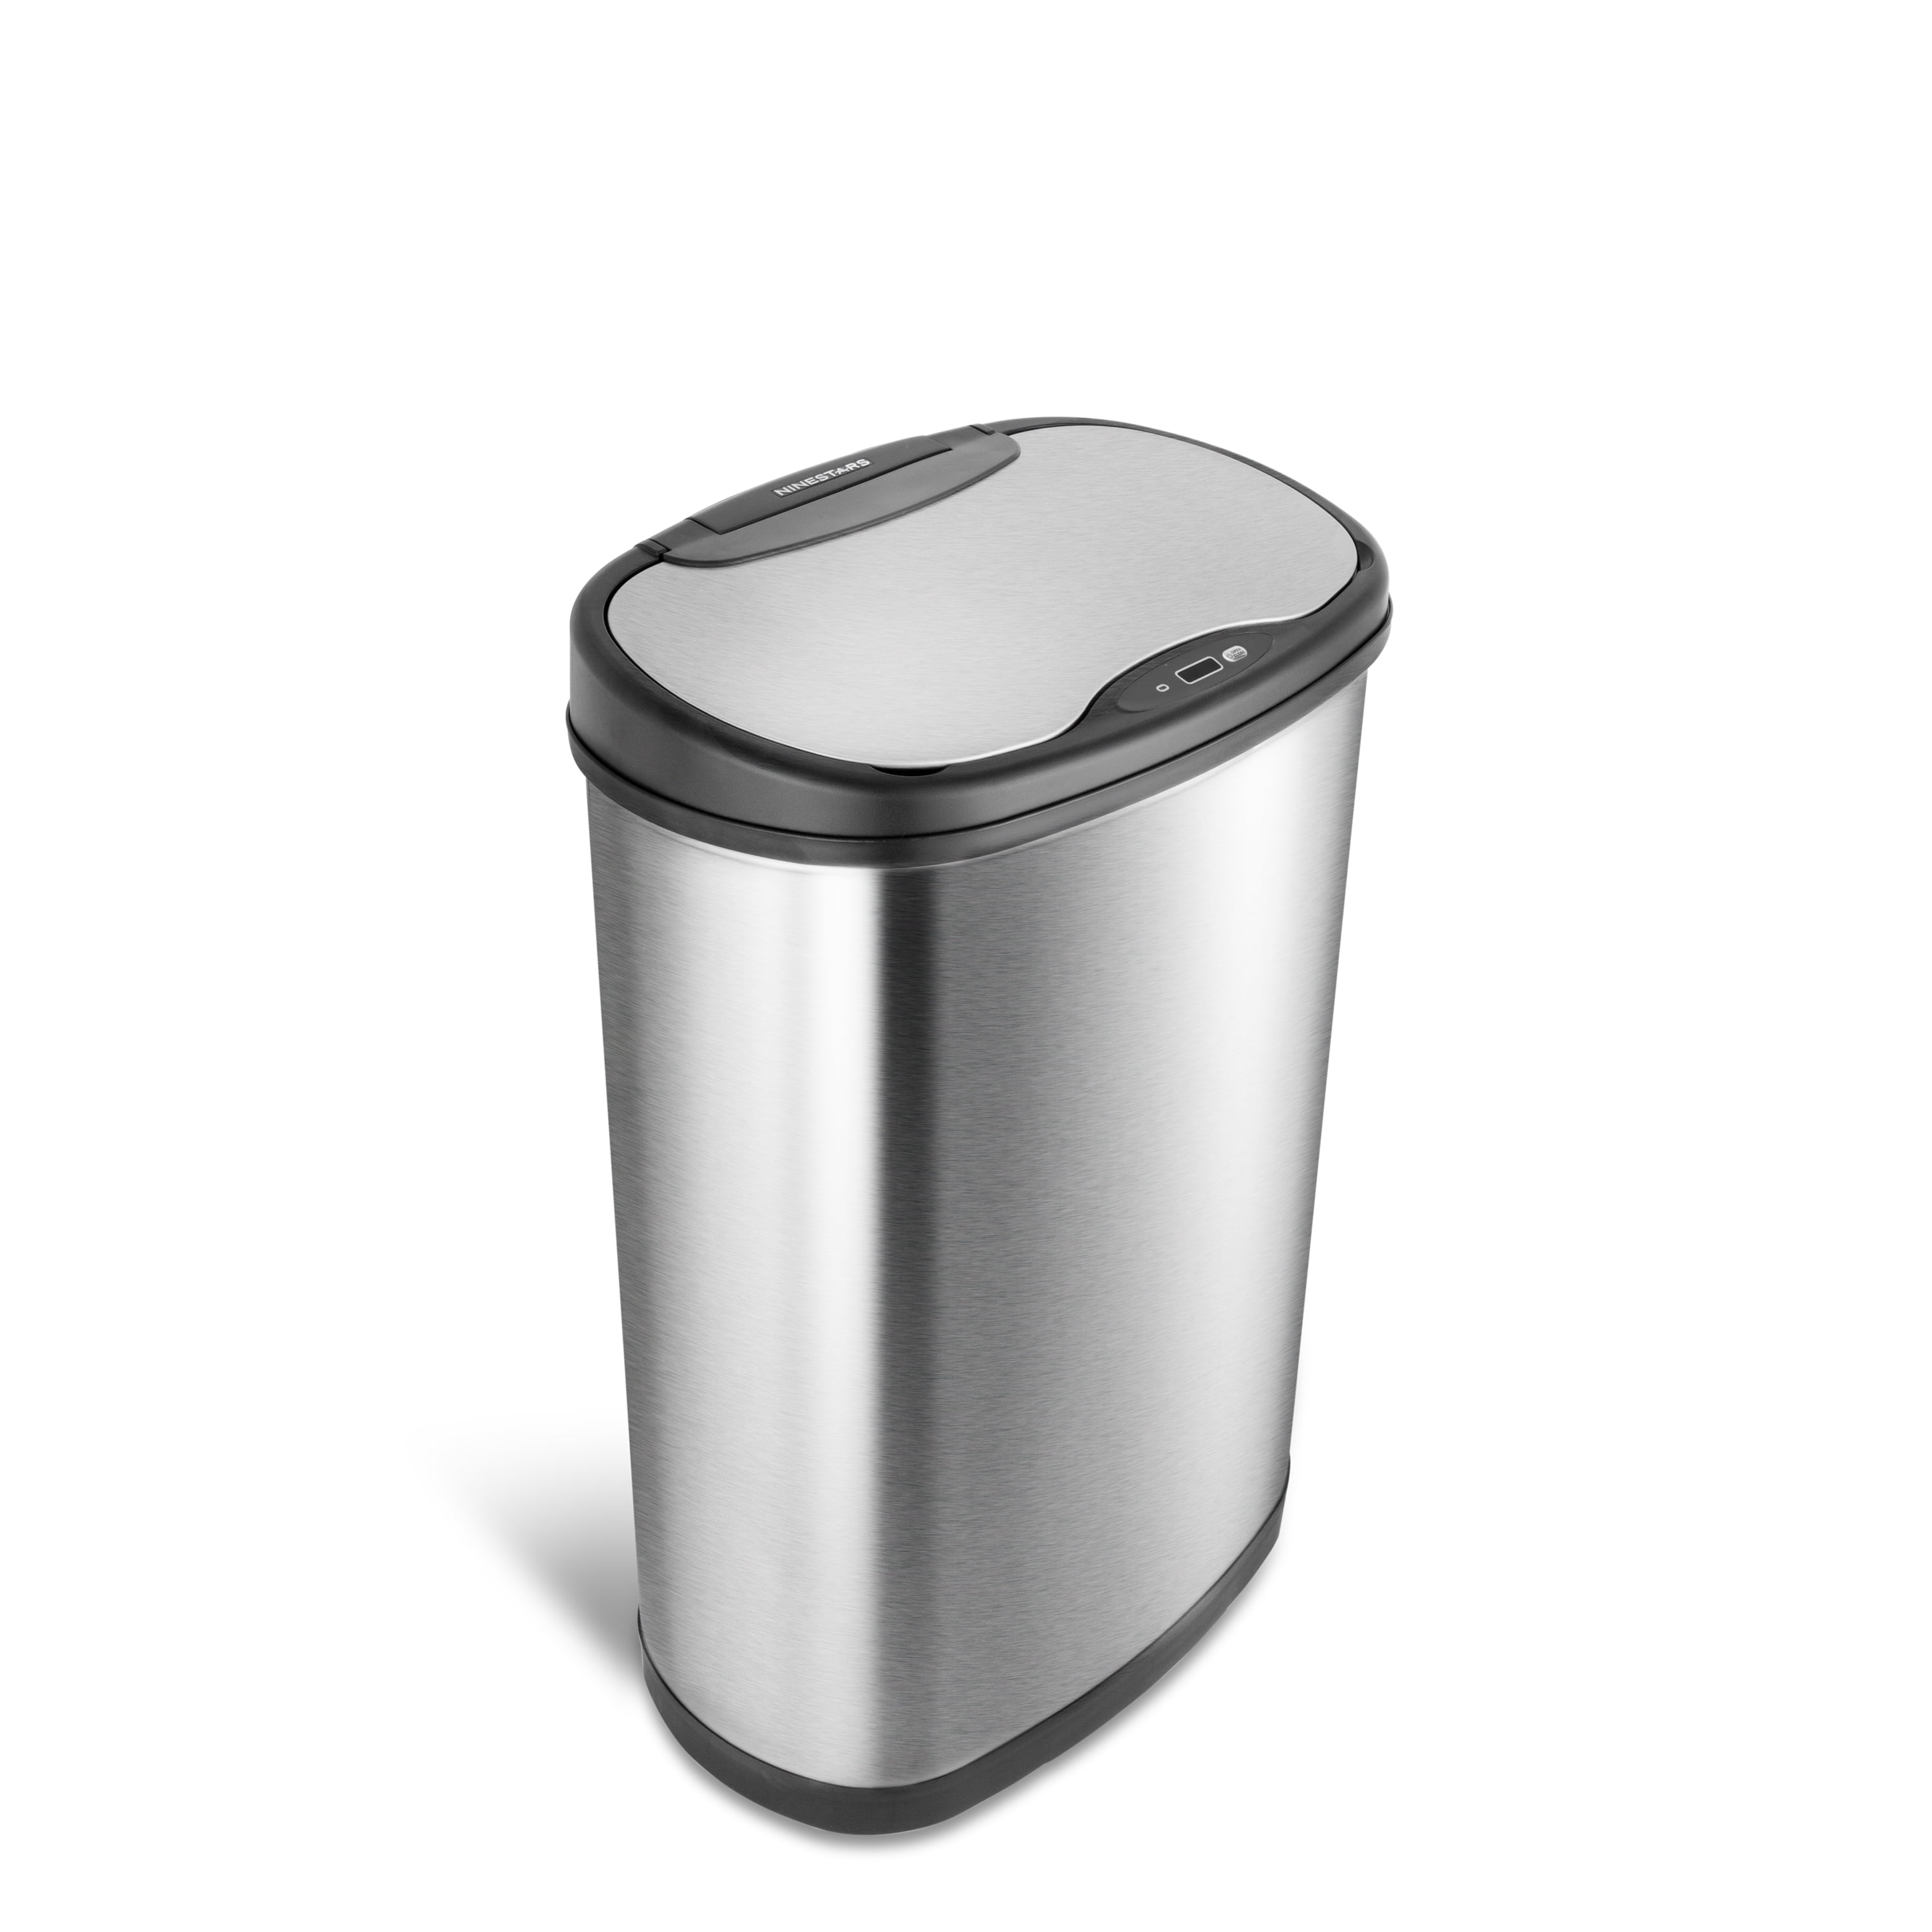 Home Kitchen Touchfree Motion Sensor Garbage Bin Stainless Steel Trash Can A6H3